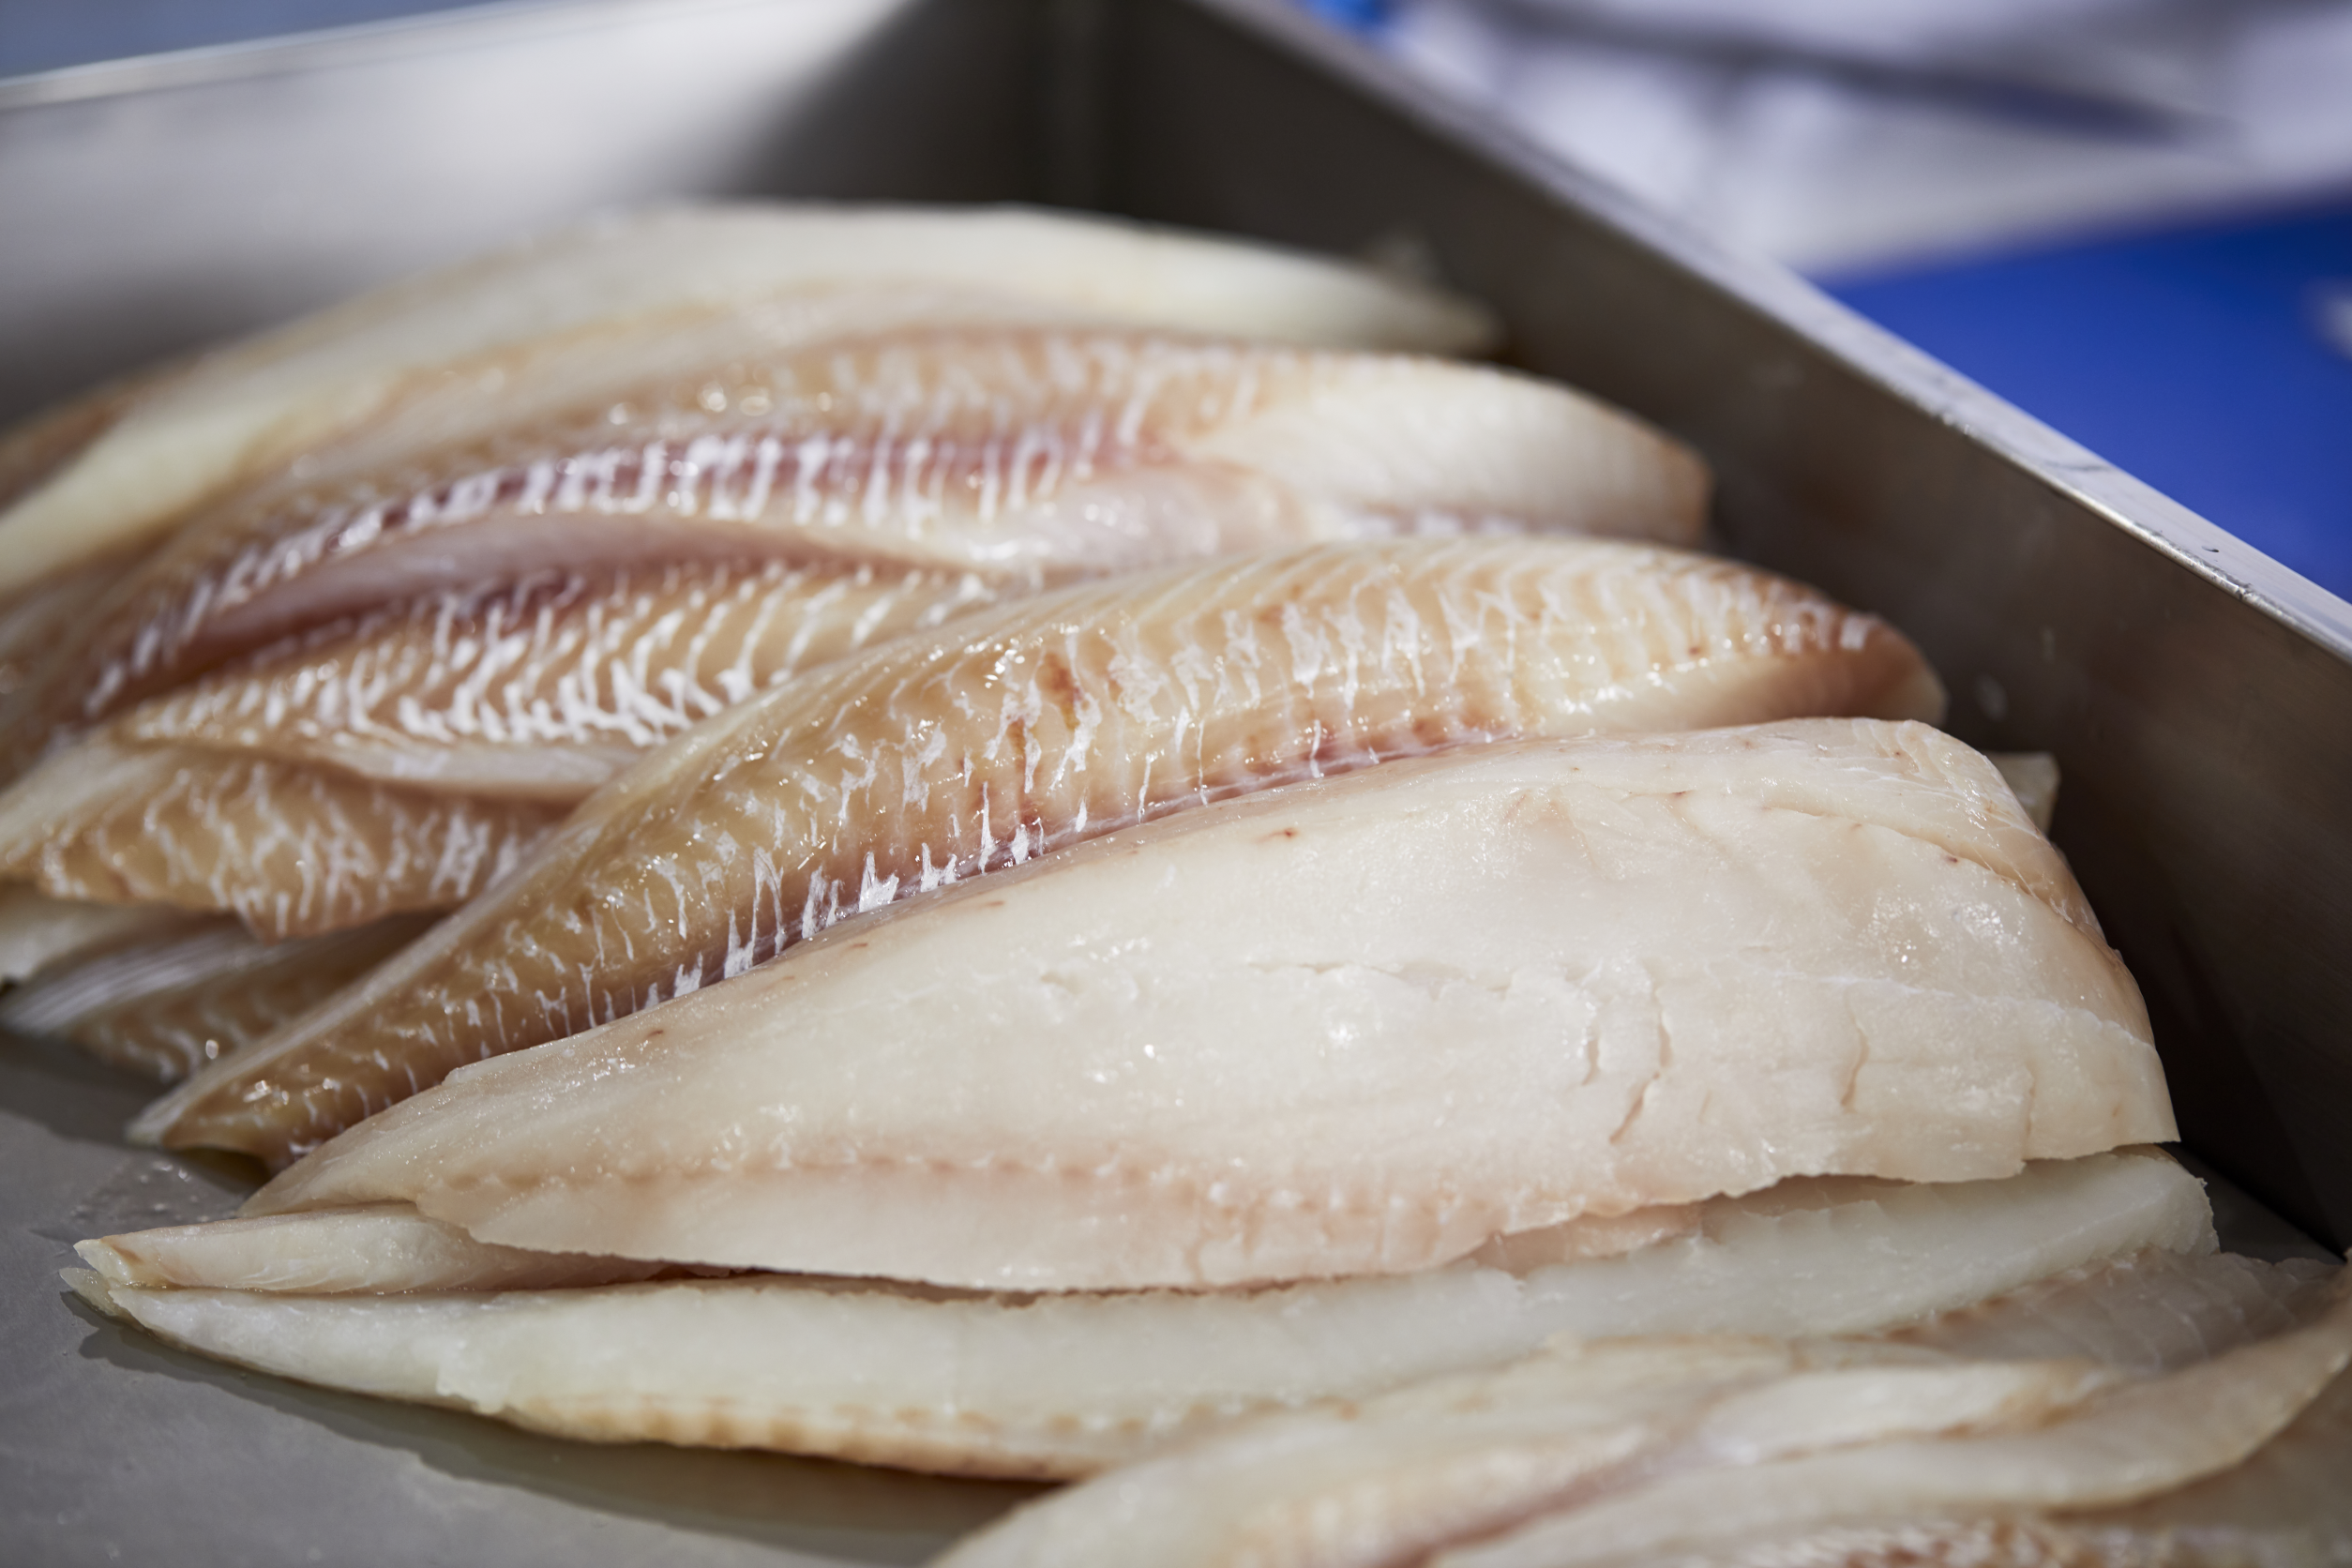 A tray full of whitefish fillets